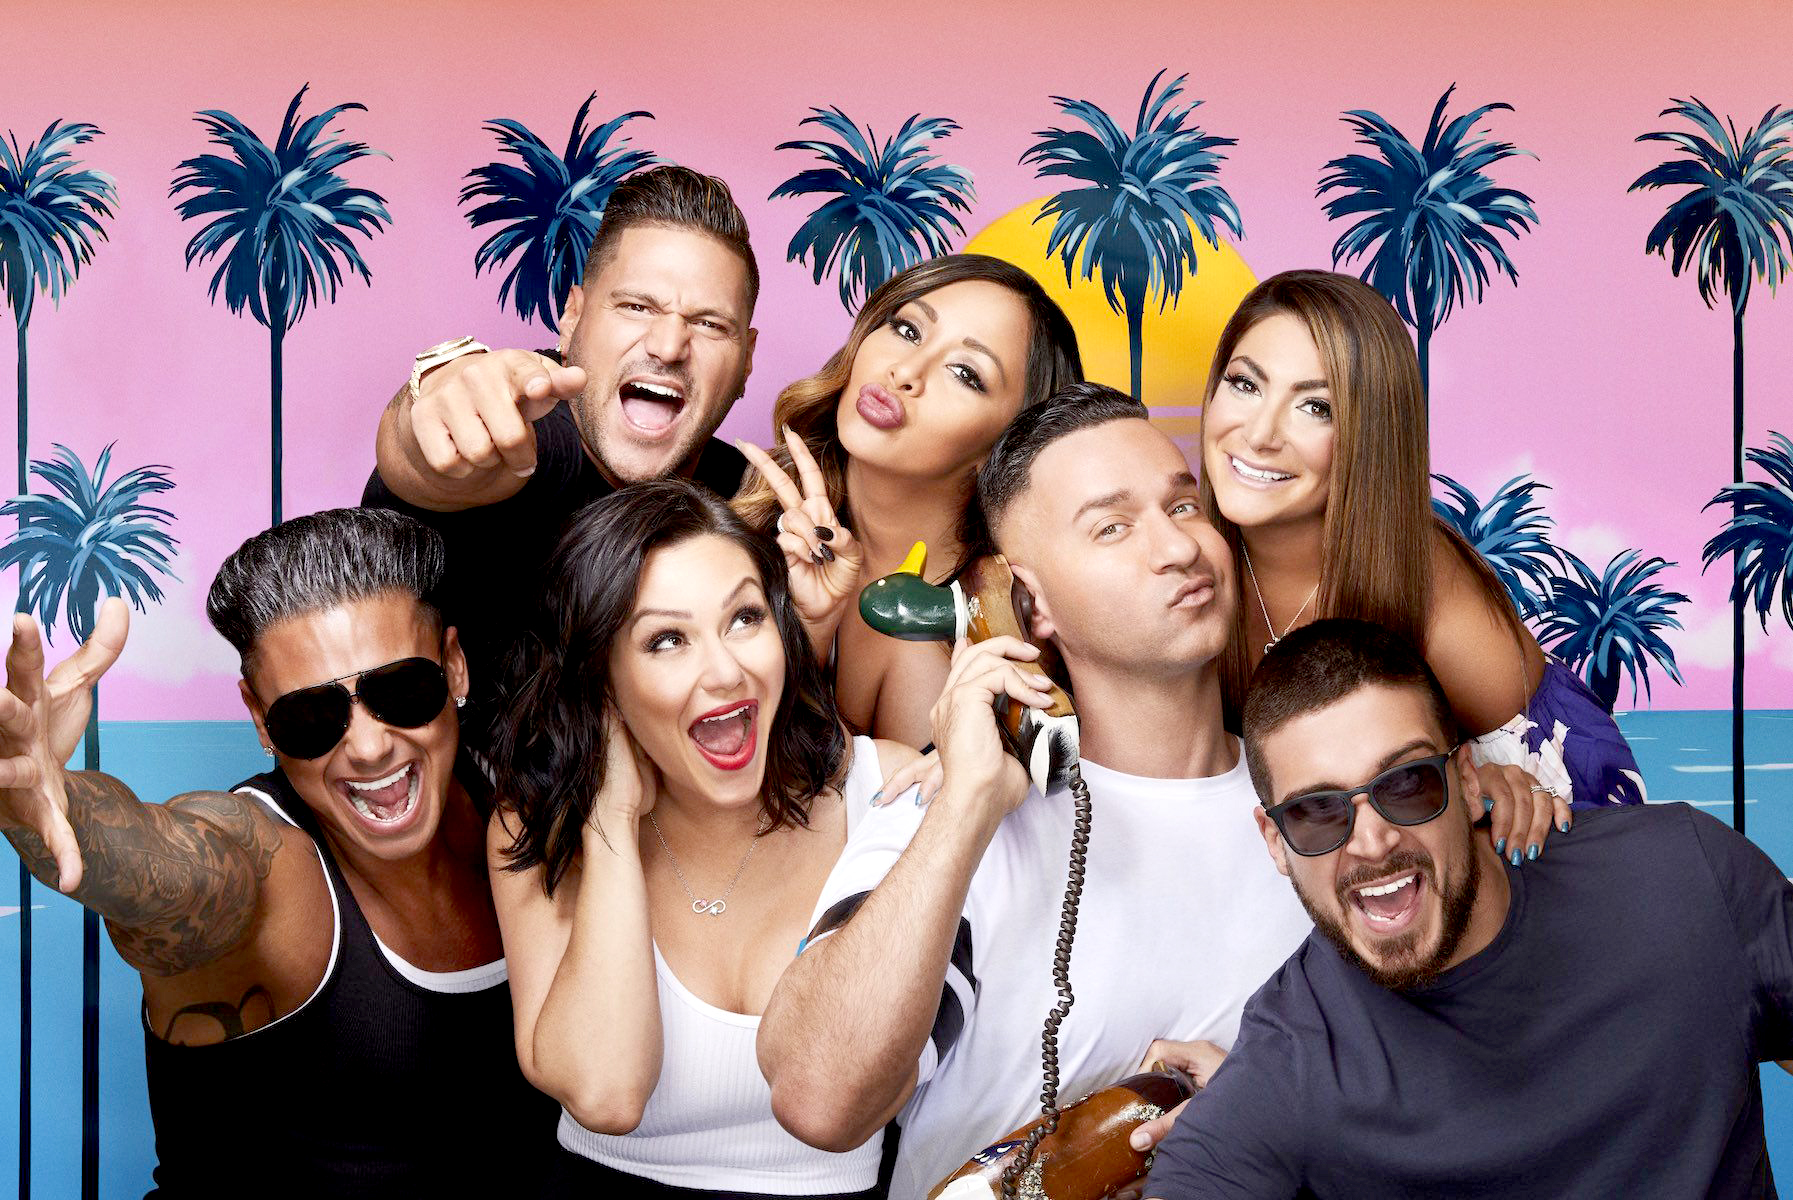 Biggest 'Jersey Shore' Scandals Through the Years